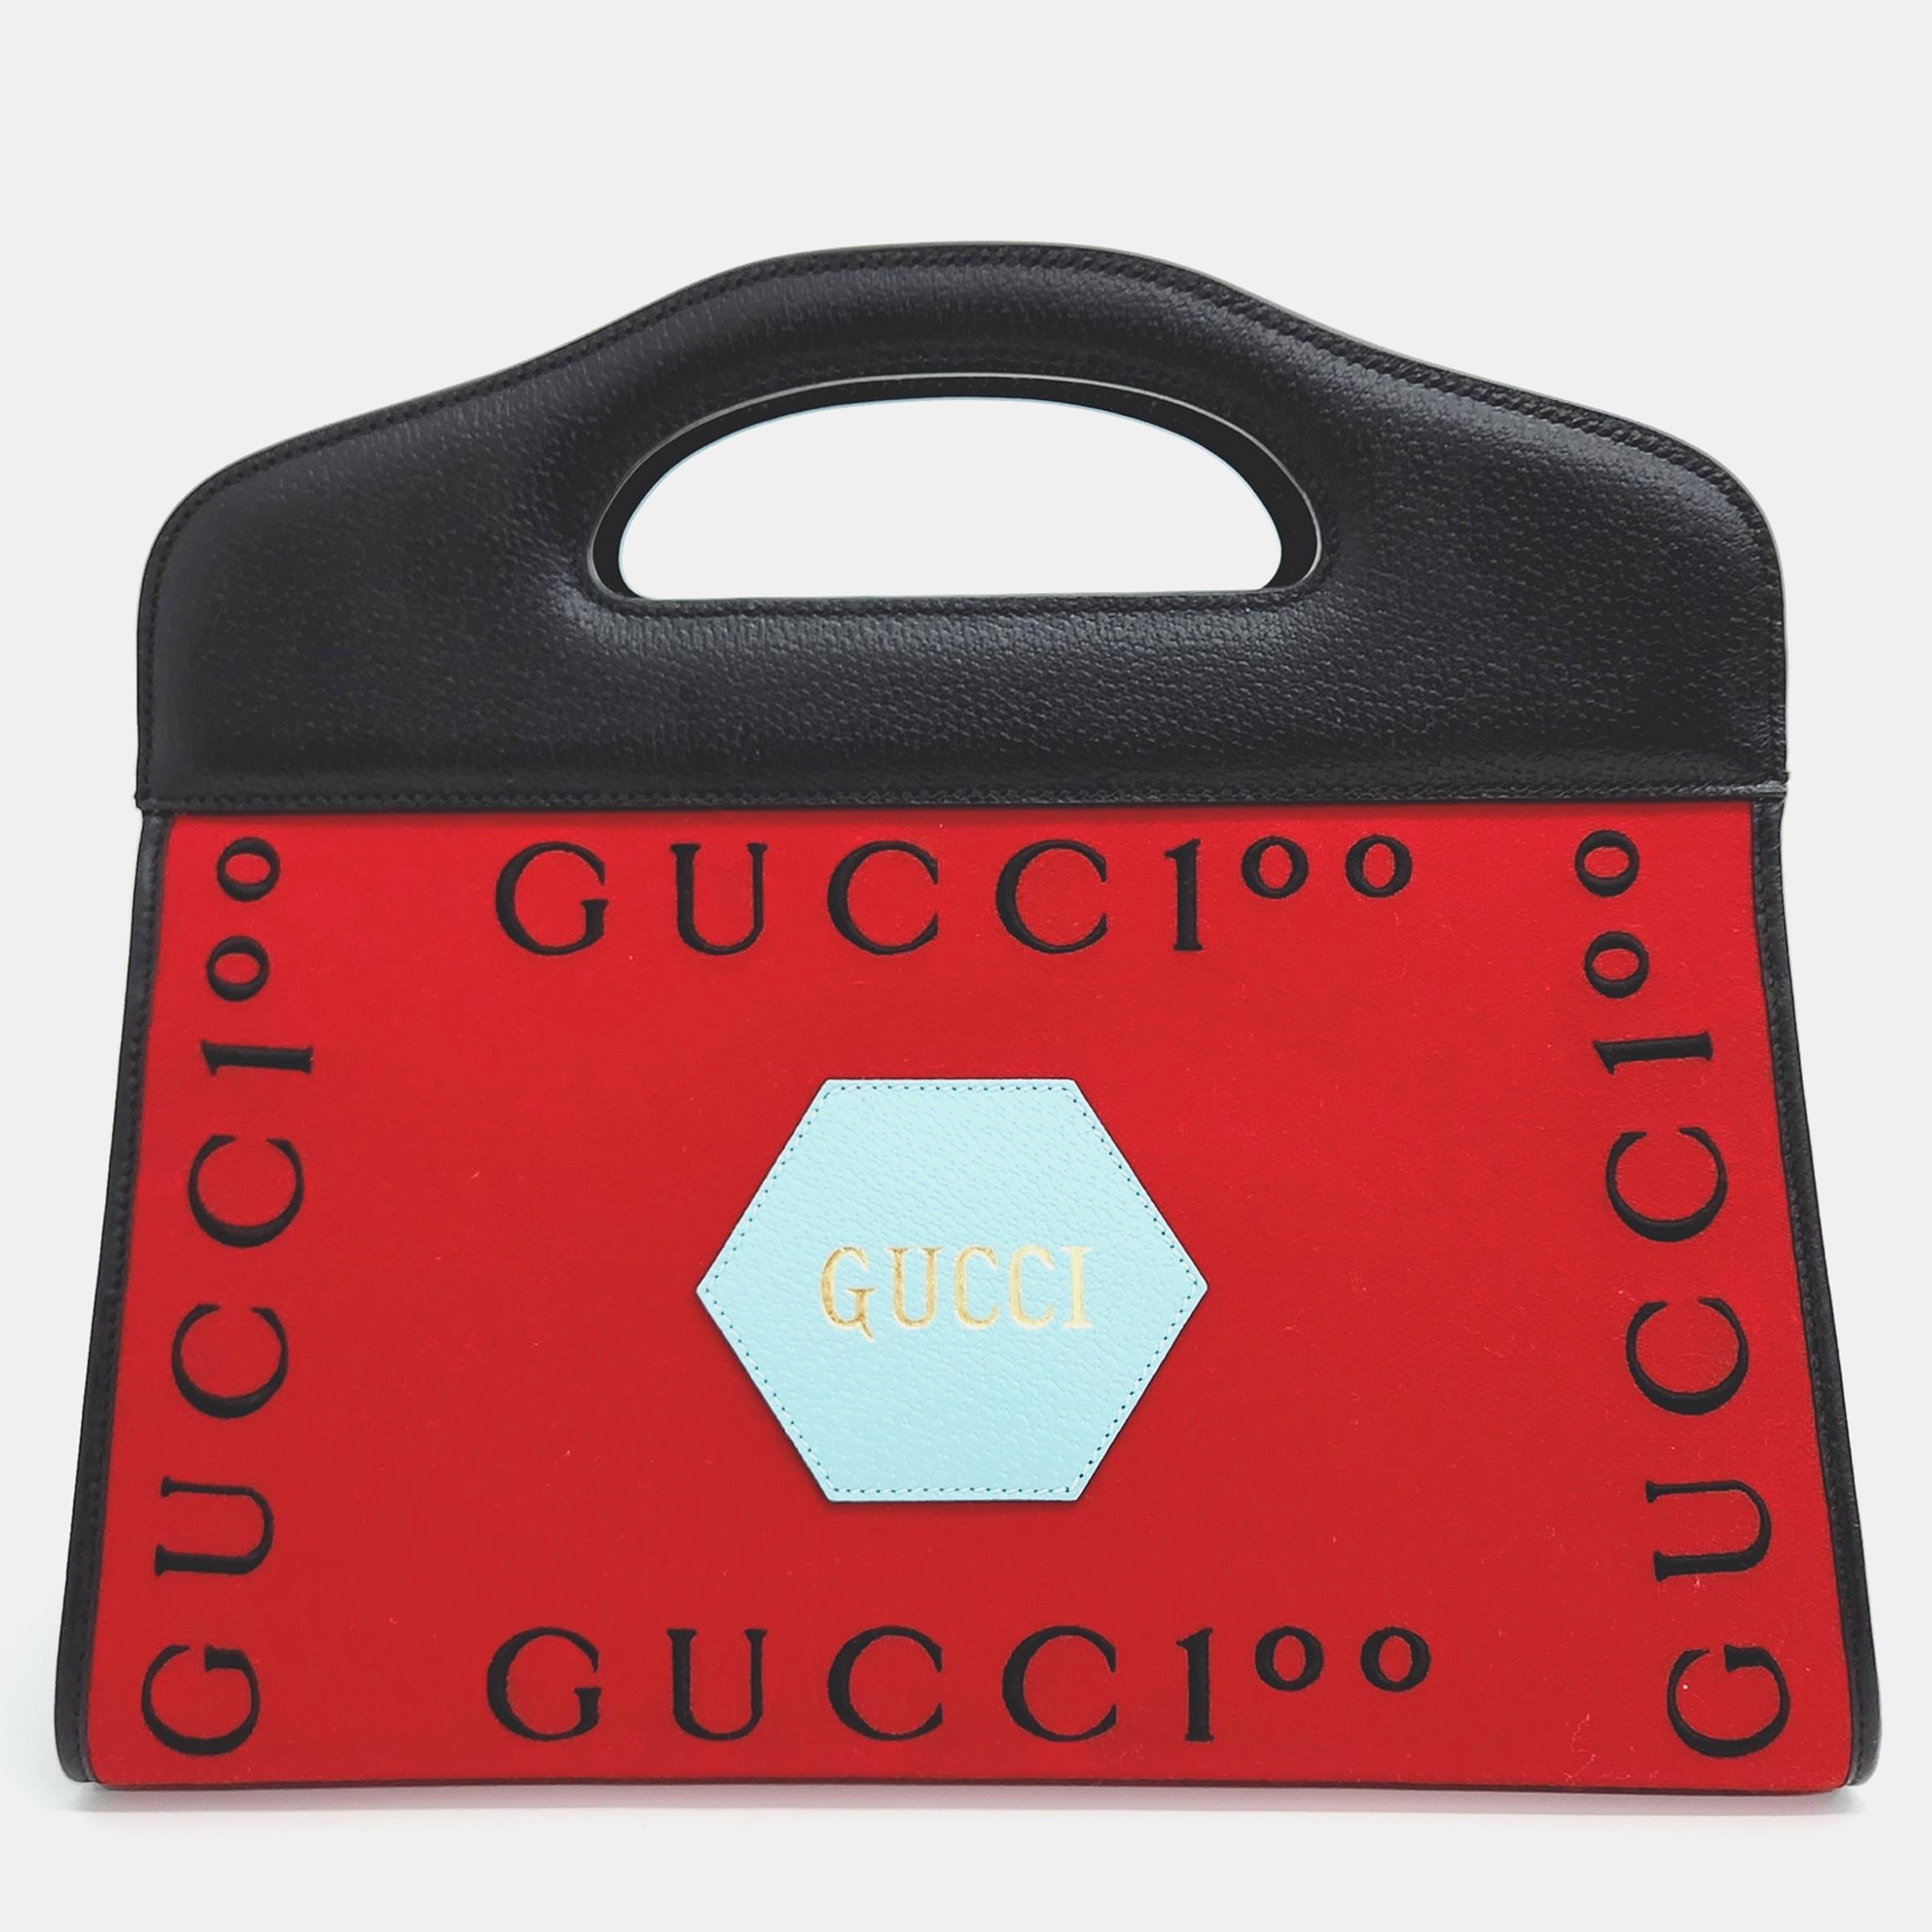 Crafted with precision this Gucci bag combines luxurious materials with impeccable design ensuring you make a sophisticated statement wherever you go. Invest in it today.